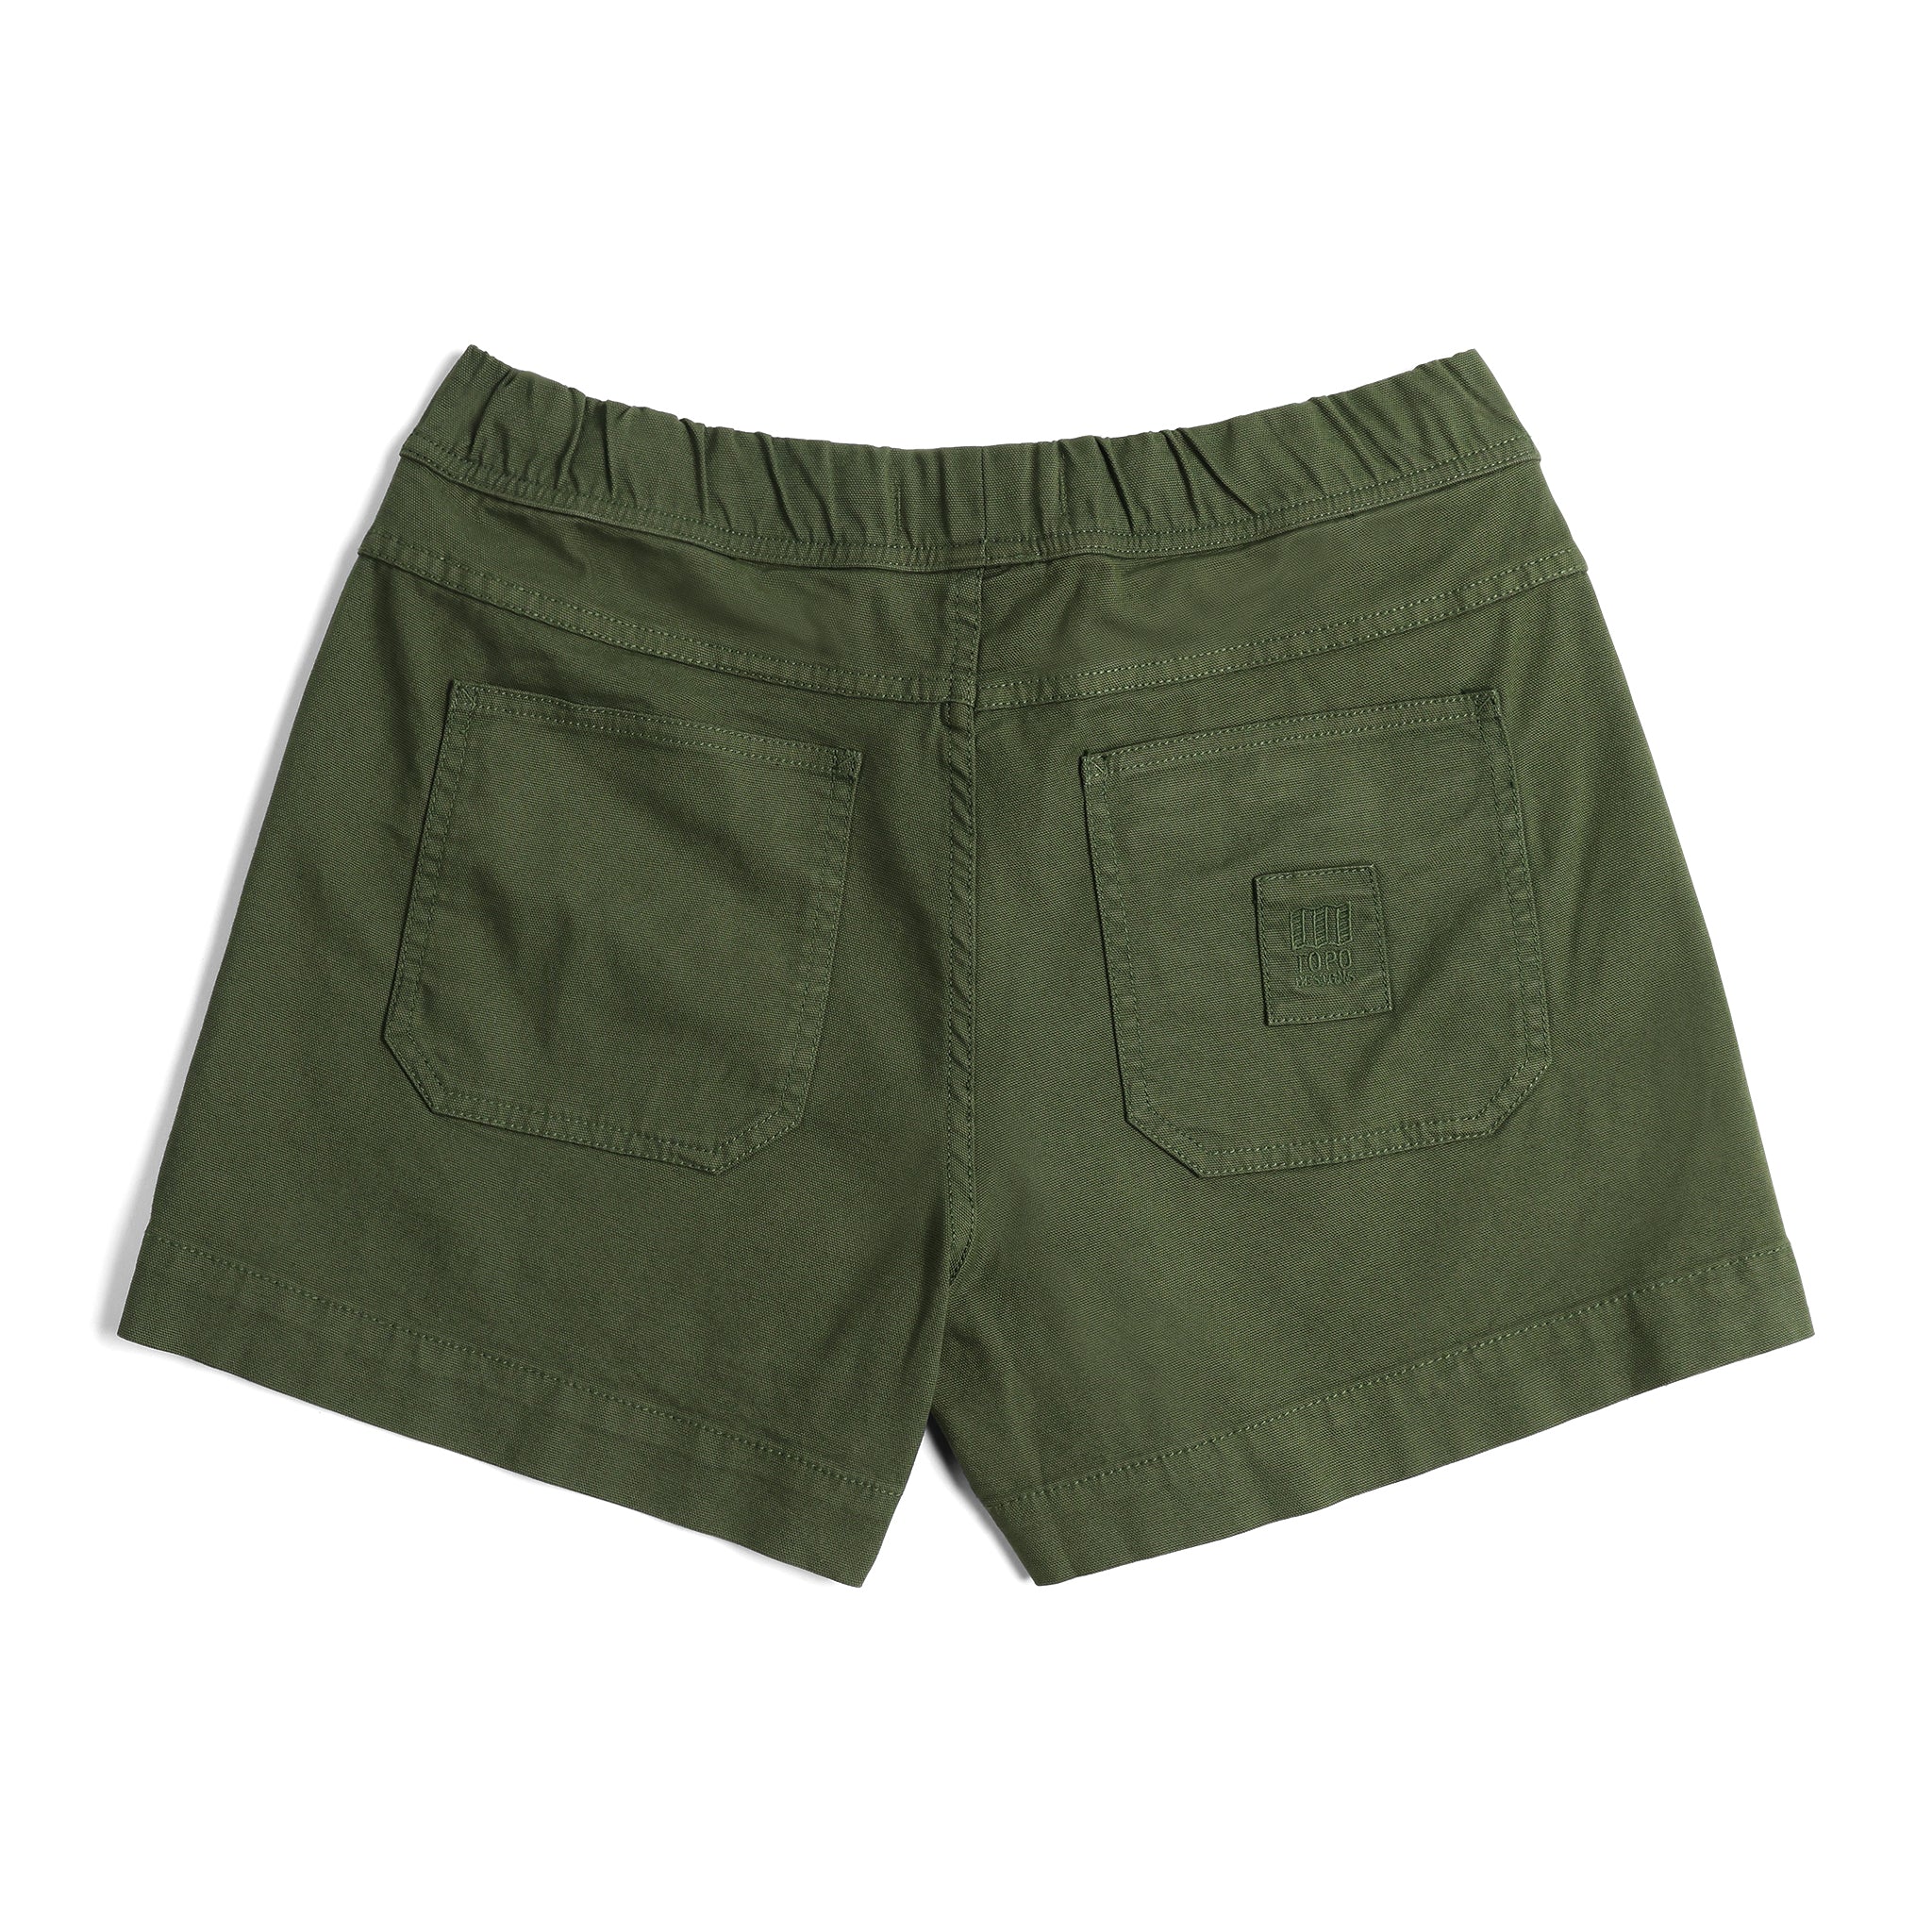 Back View of Topo Designs Dirt Shorts - Women's in "Olive"